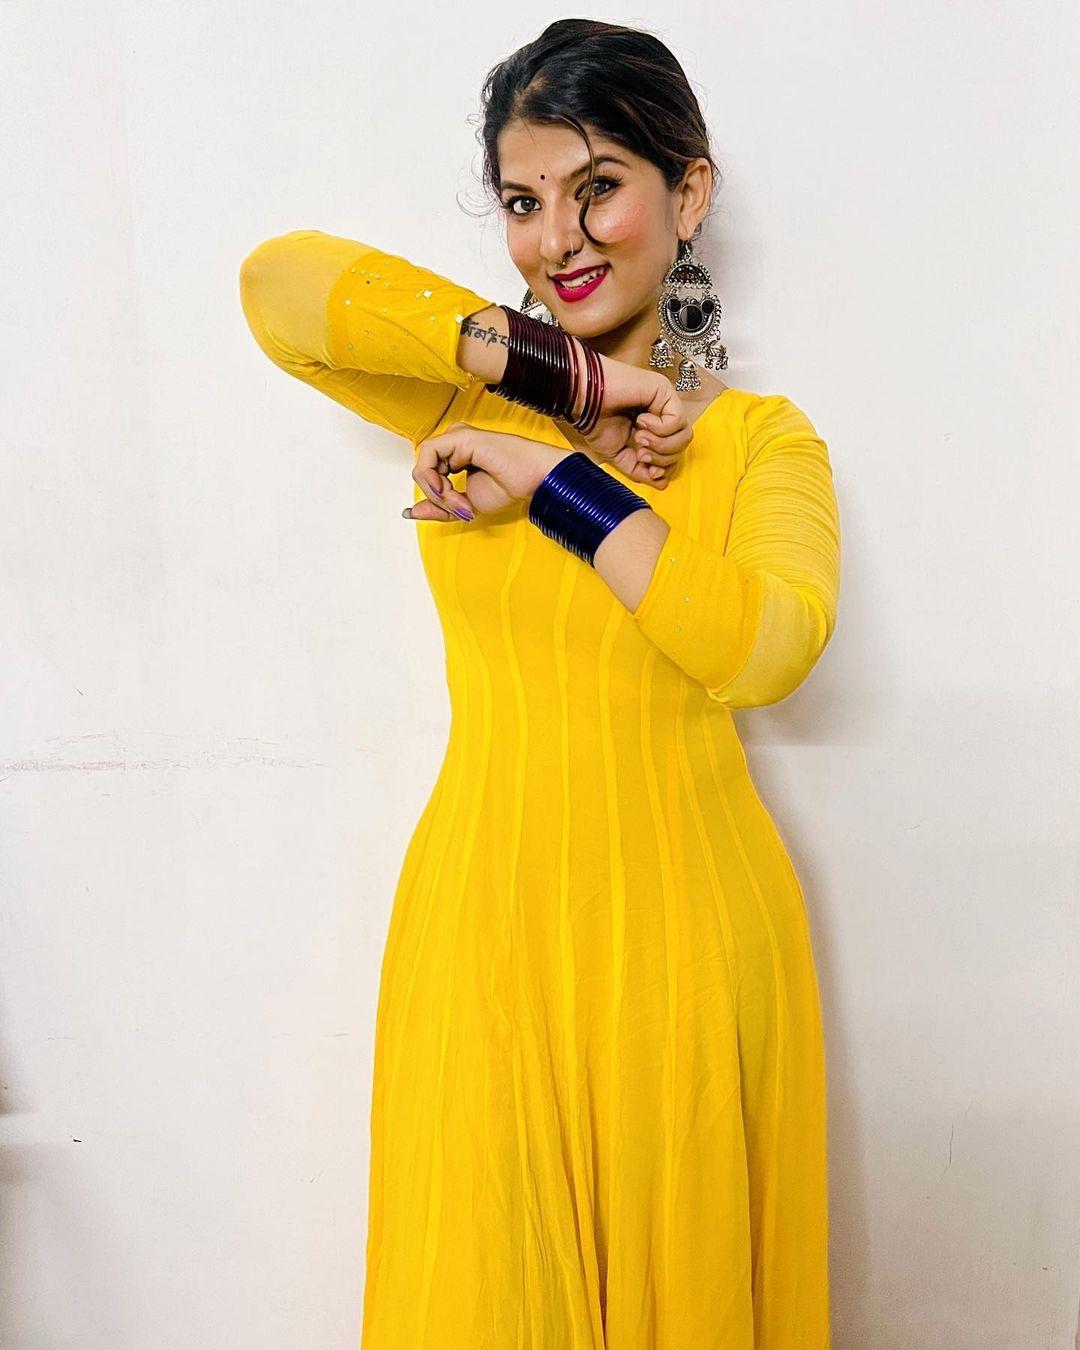 Aswathy S Nair In Yellow Dress Hot And Sexy Photoshoot Looking Very Beautiful And Cute Stills